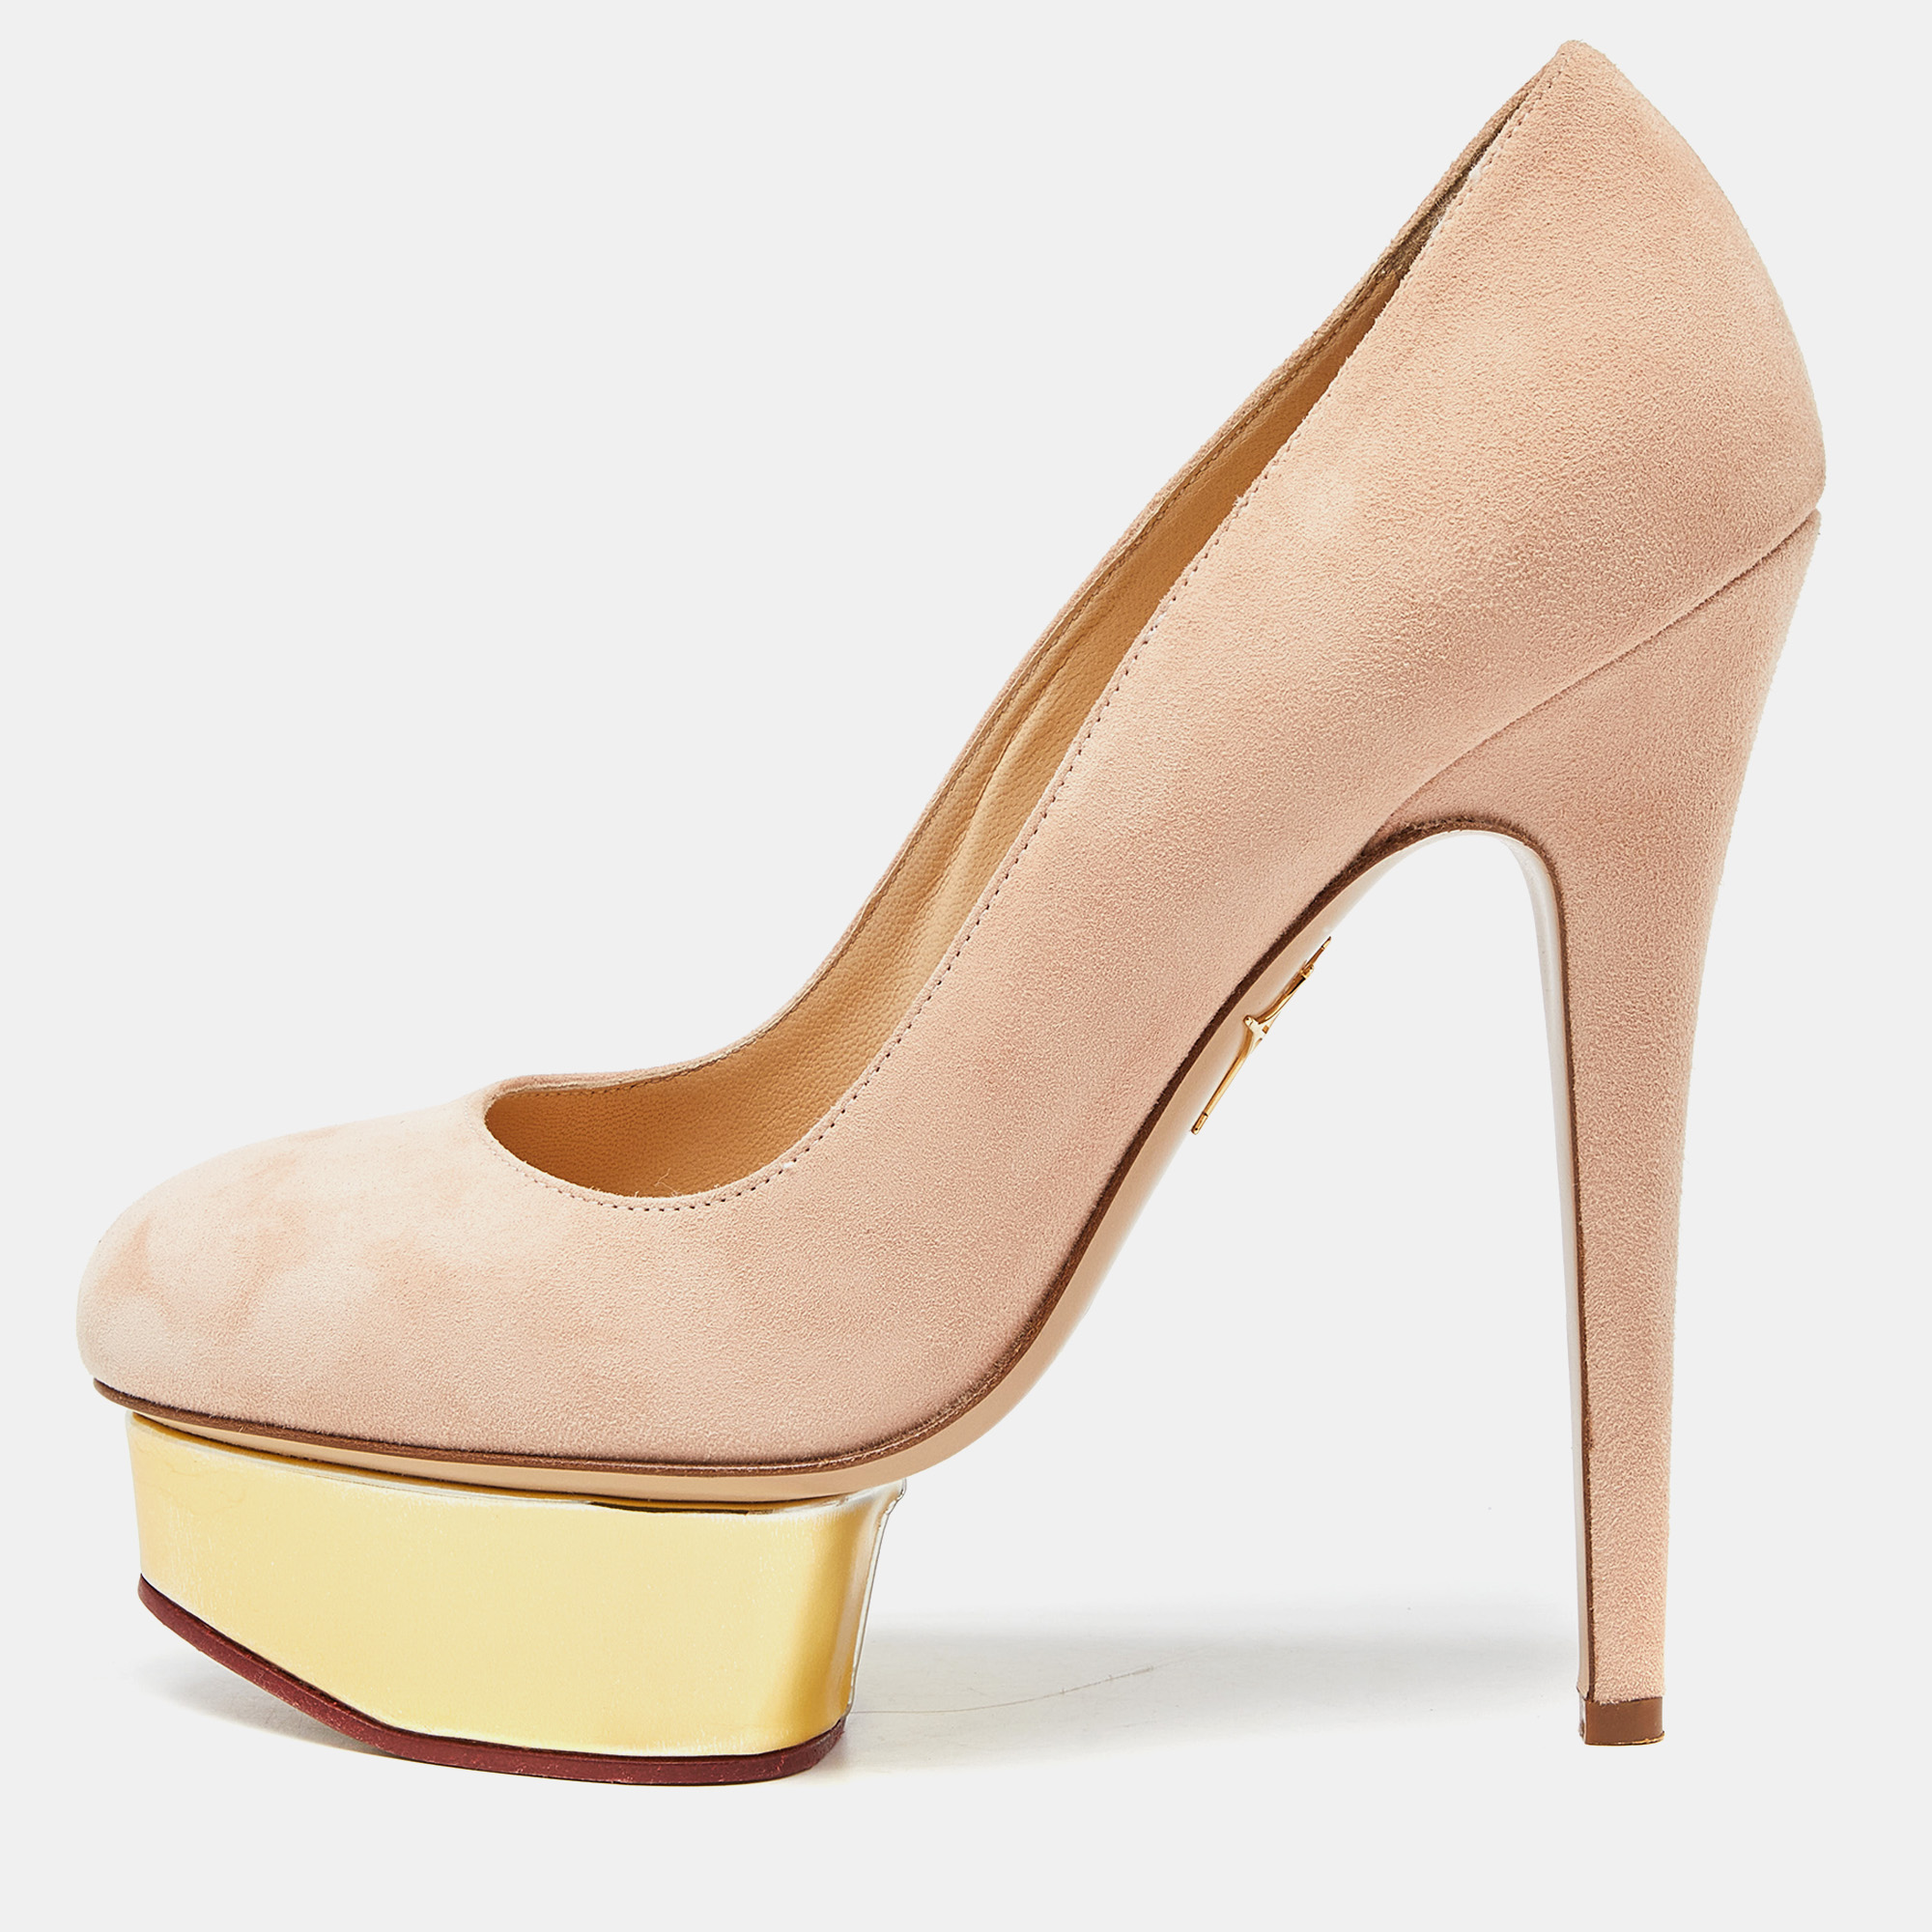 This pair from Charlotte Olympia features the signature dolly platform design. Sleek beige uppers are complemented by gold tone platform islands. A high arch adds to its design and it is finished with a straight stiletto heel.